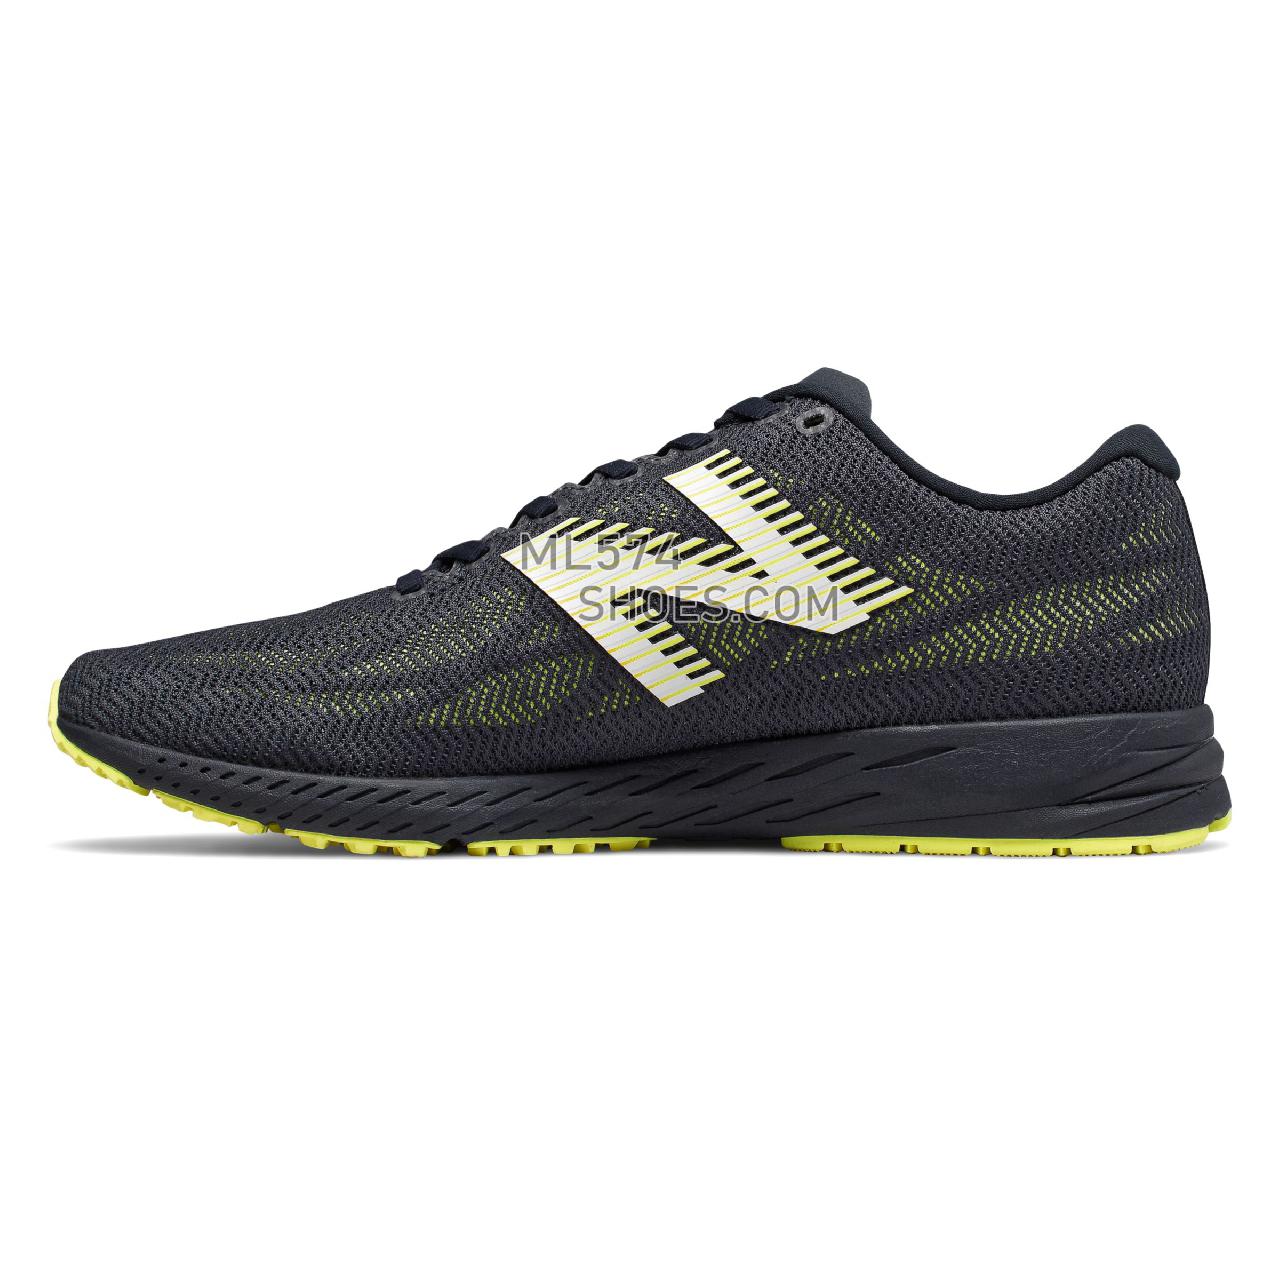 New Balance 1400v6 - Men's Race Running - Eclipse with Bleached Lime Glo - M1400SY6